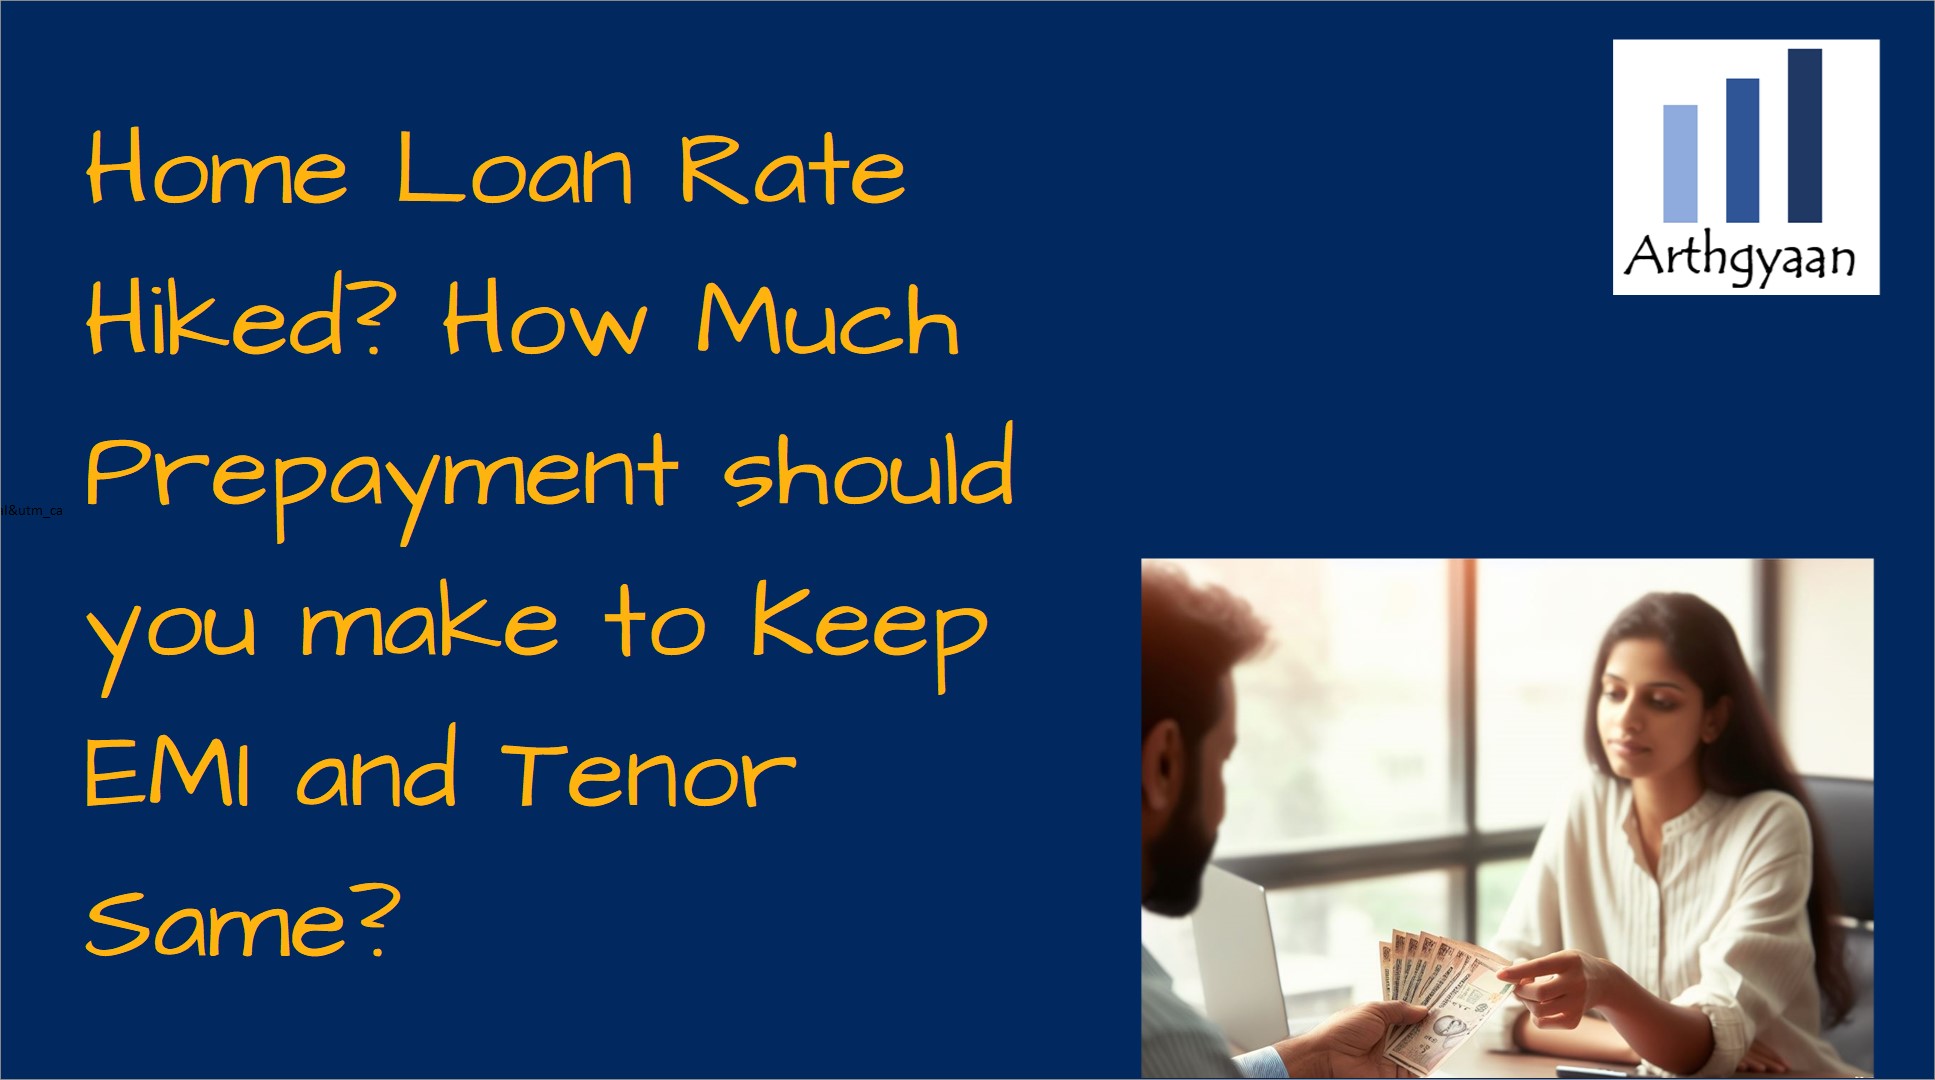 Home Loan Rate Hiked? How Much Prepayment should you make to Keep EMI and Tenor Same?